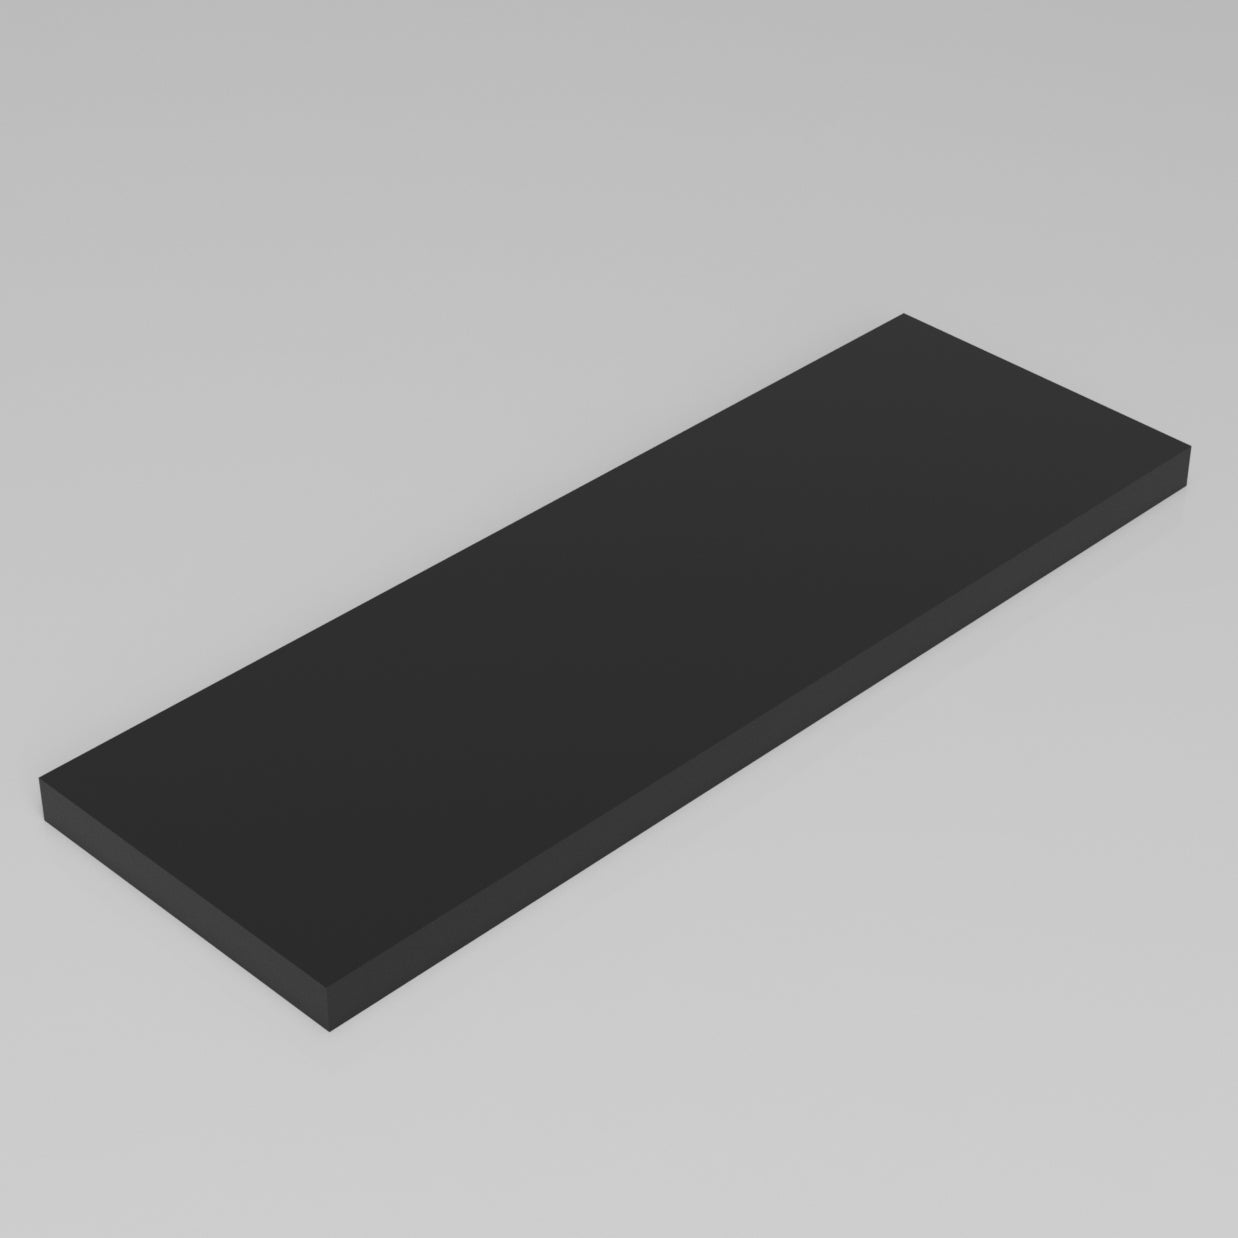 Machinable Wax Rectangular Block Front View 1 Inch by 8 Inch by 24 Inch